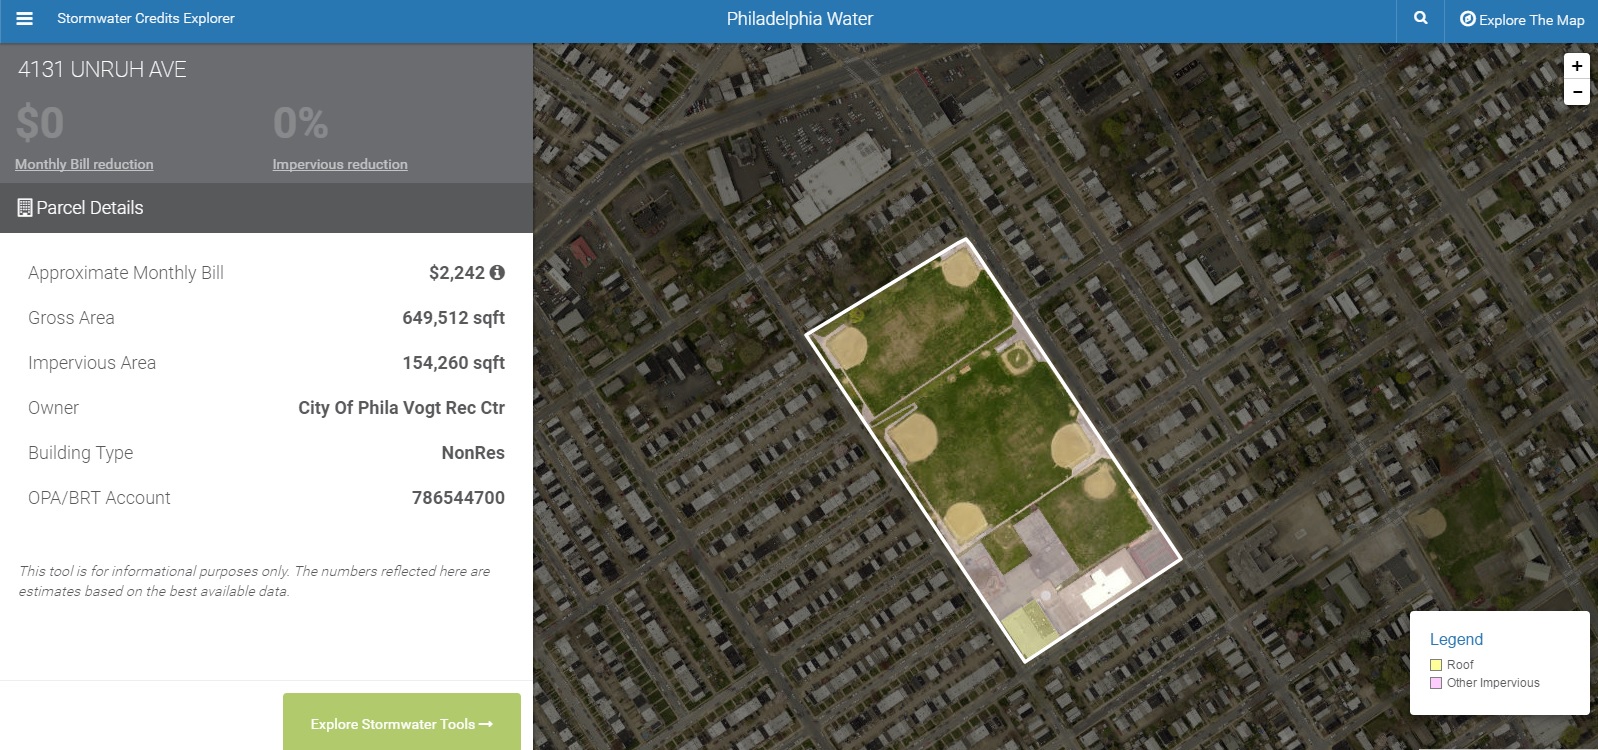 From planning to permitting, stormwater apps help industrial property owners